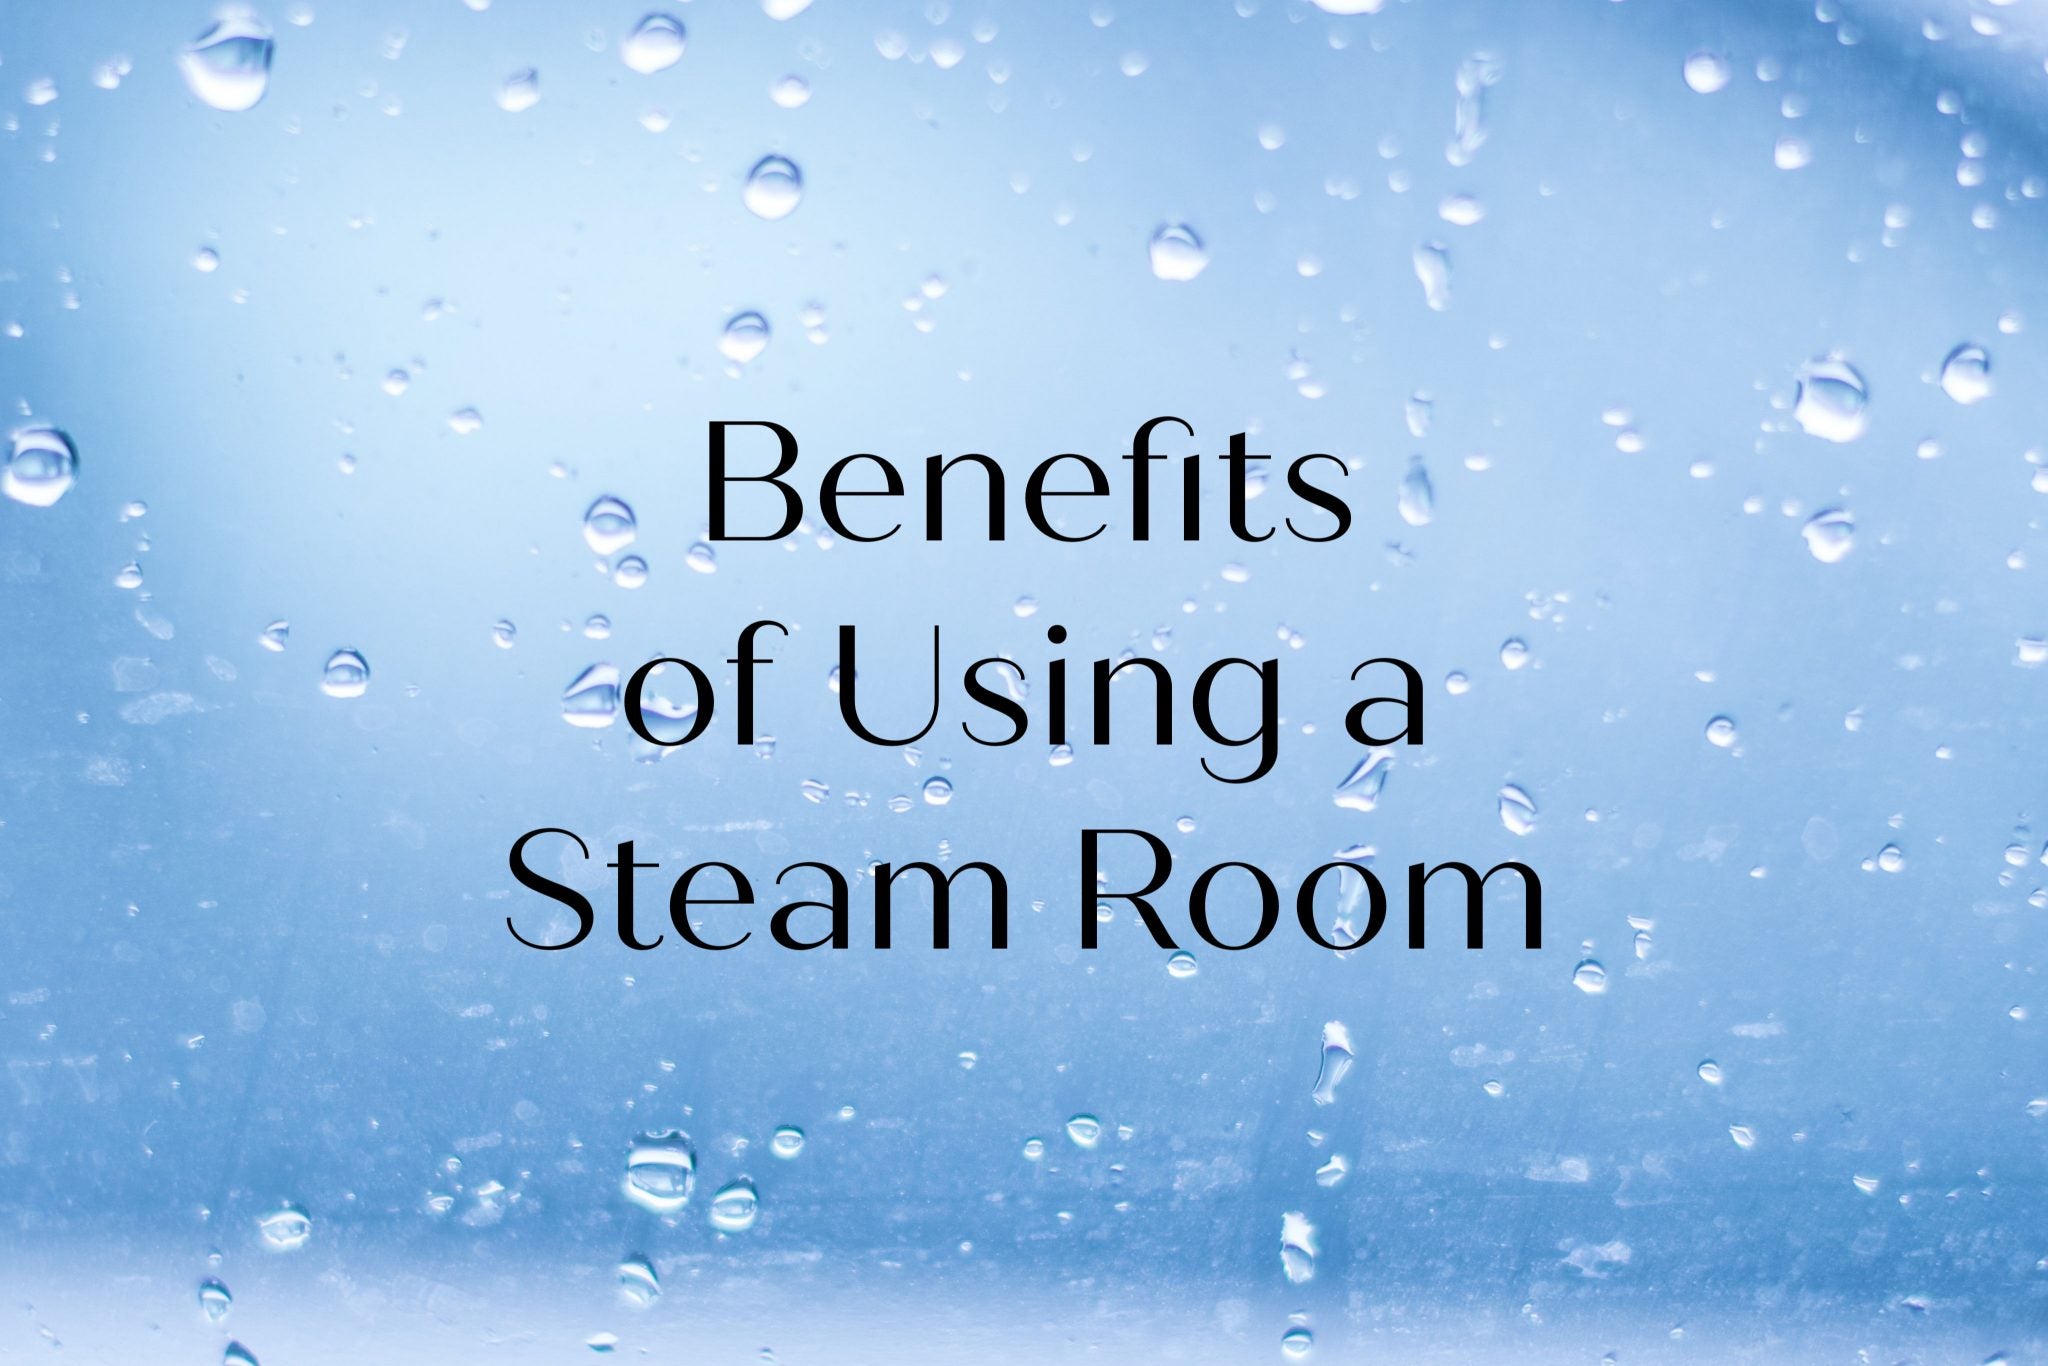 Health and skin benefits of using a steam room. #spa #skincare #health